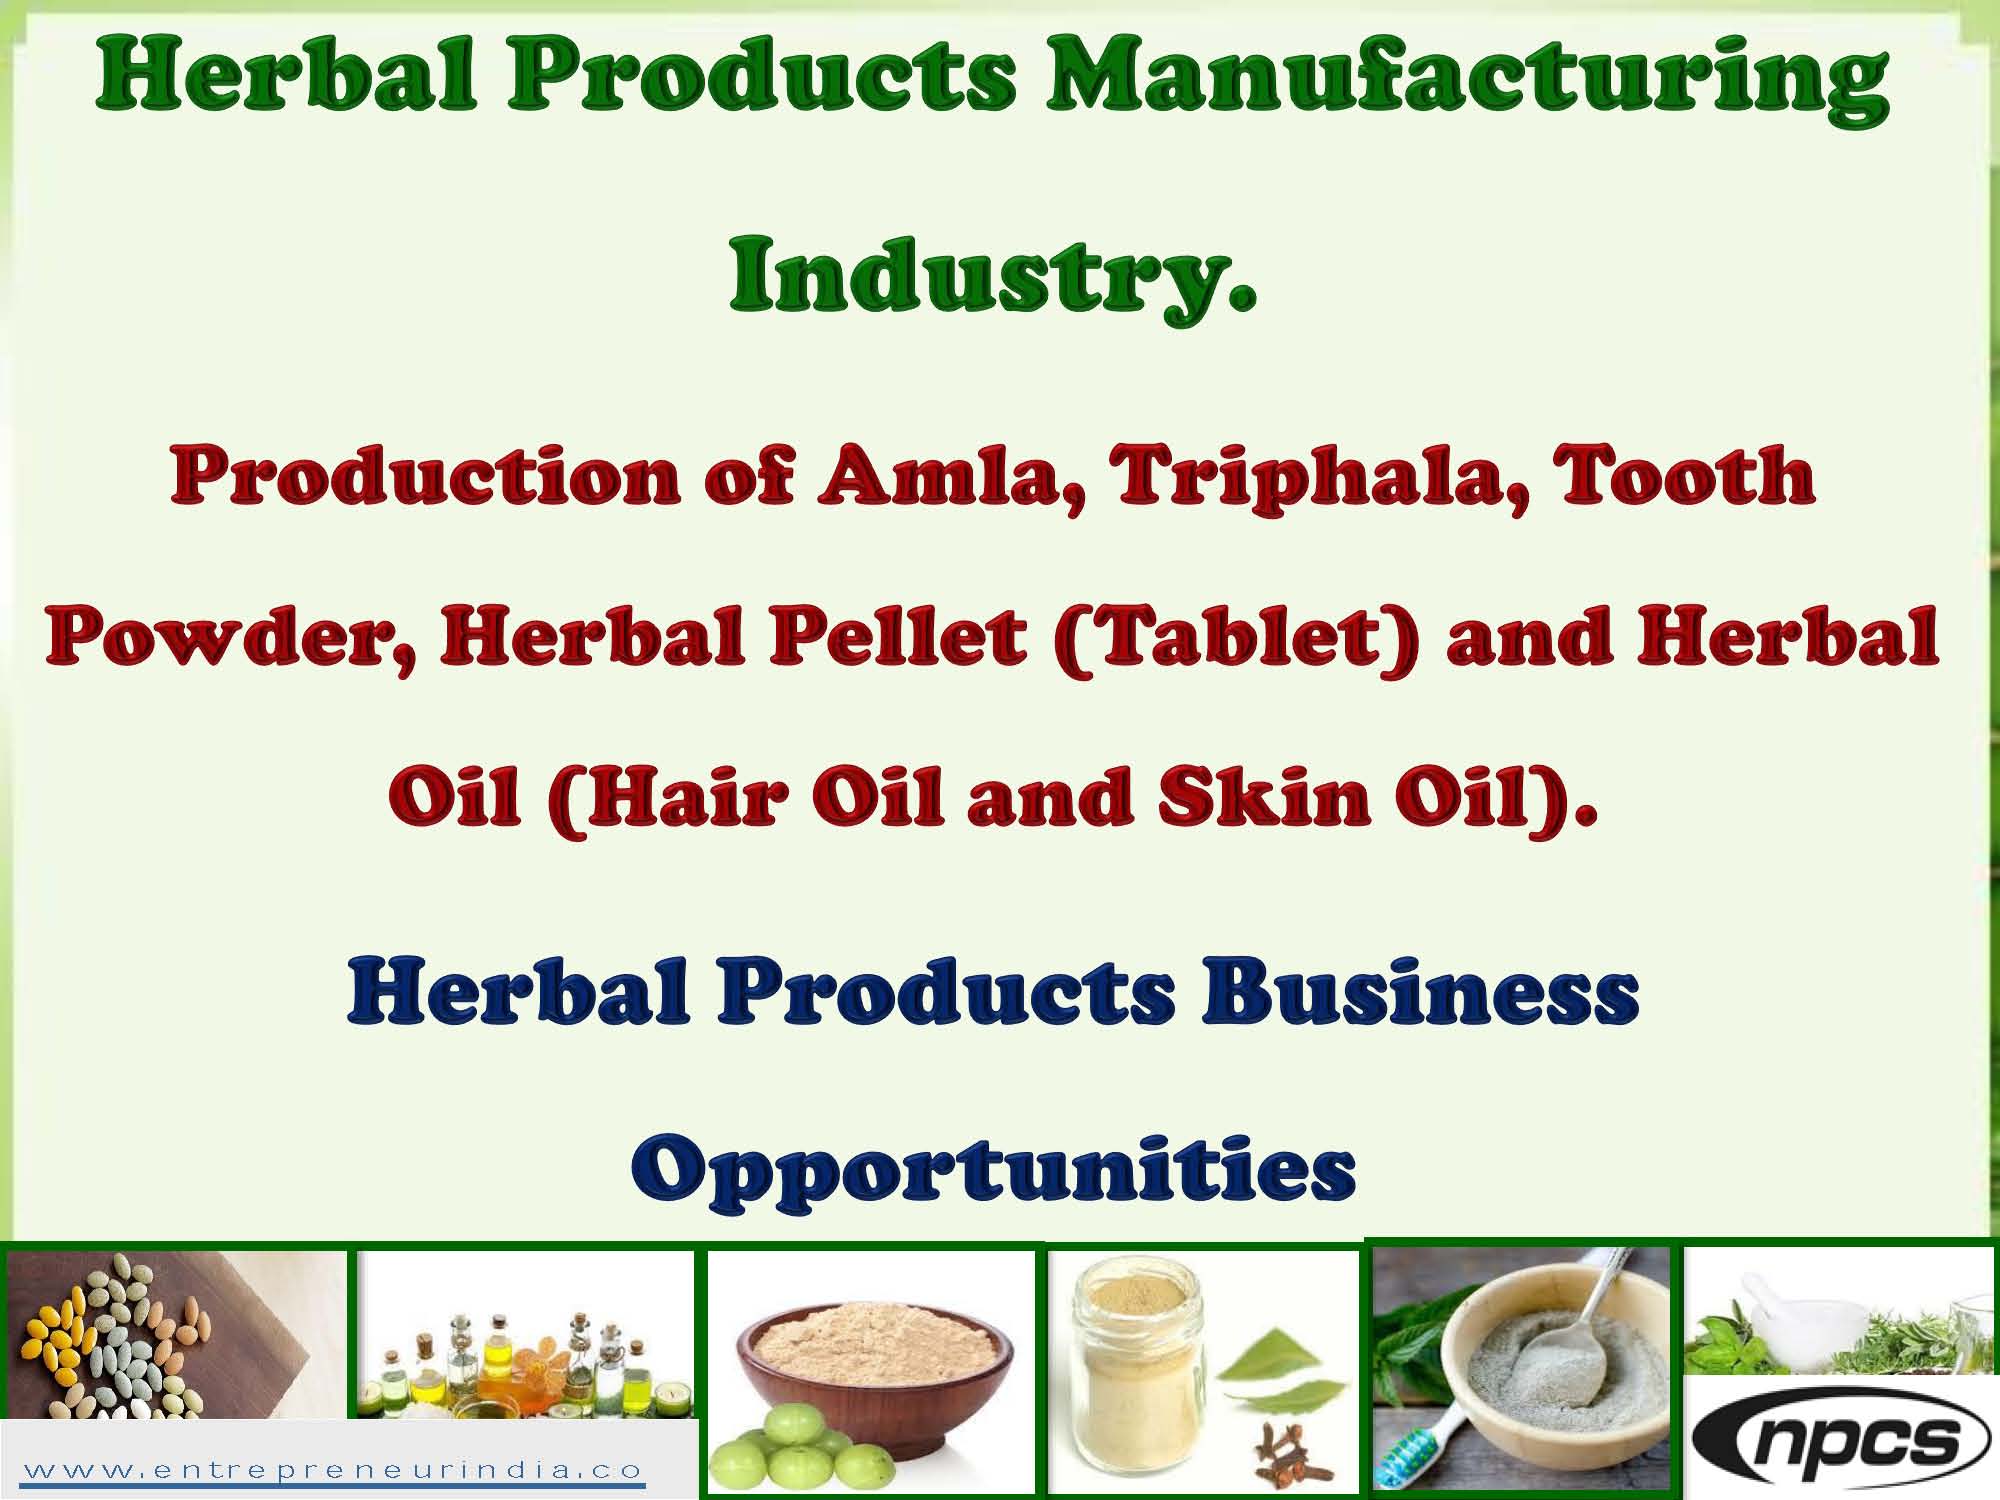 Herbal Products Manufacturing Industry